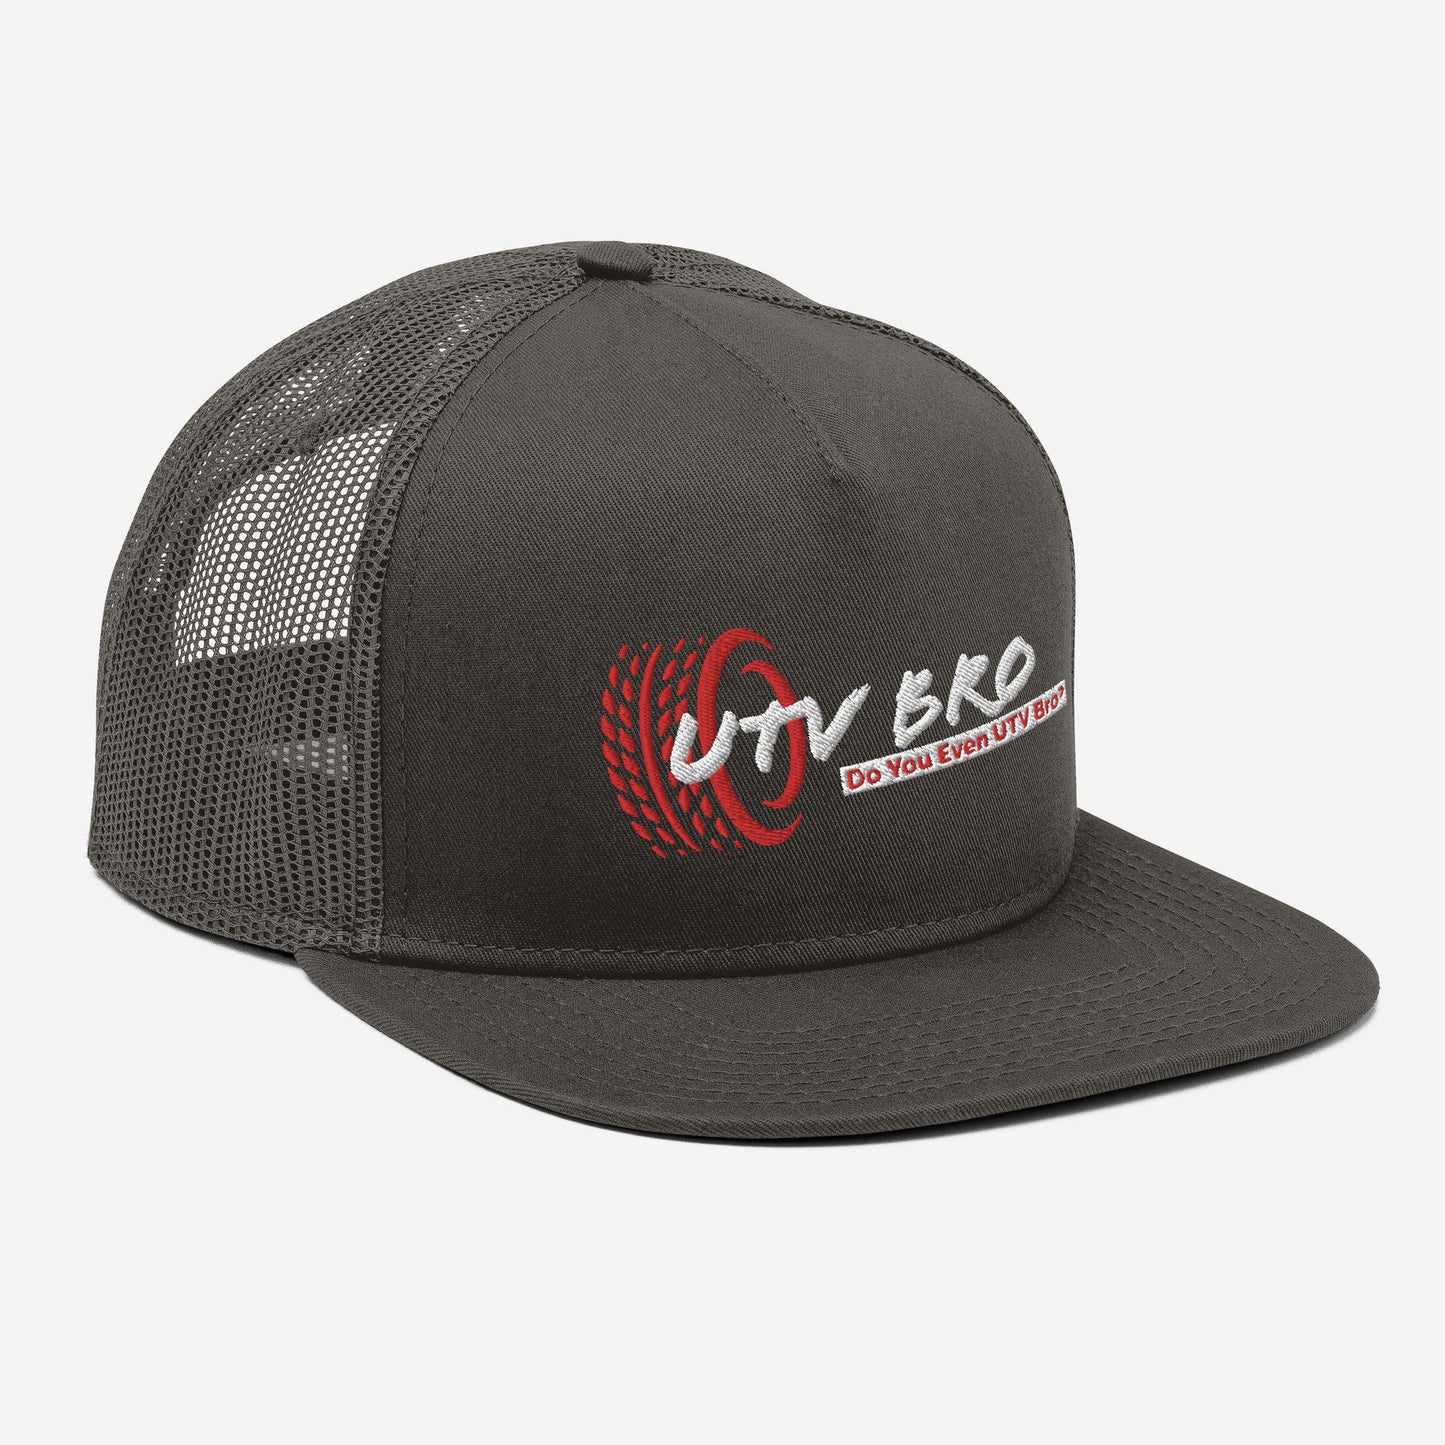 The Snapback Bro Cap w/ embroidered design. (Charcoal Grey)